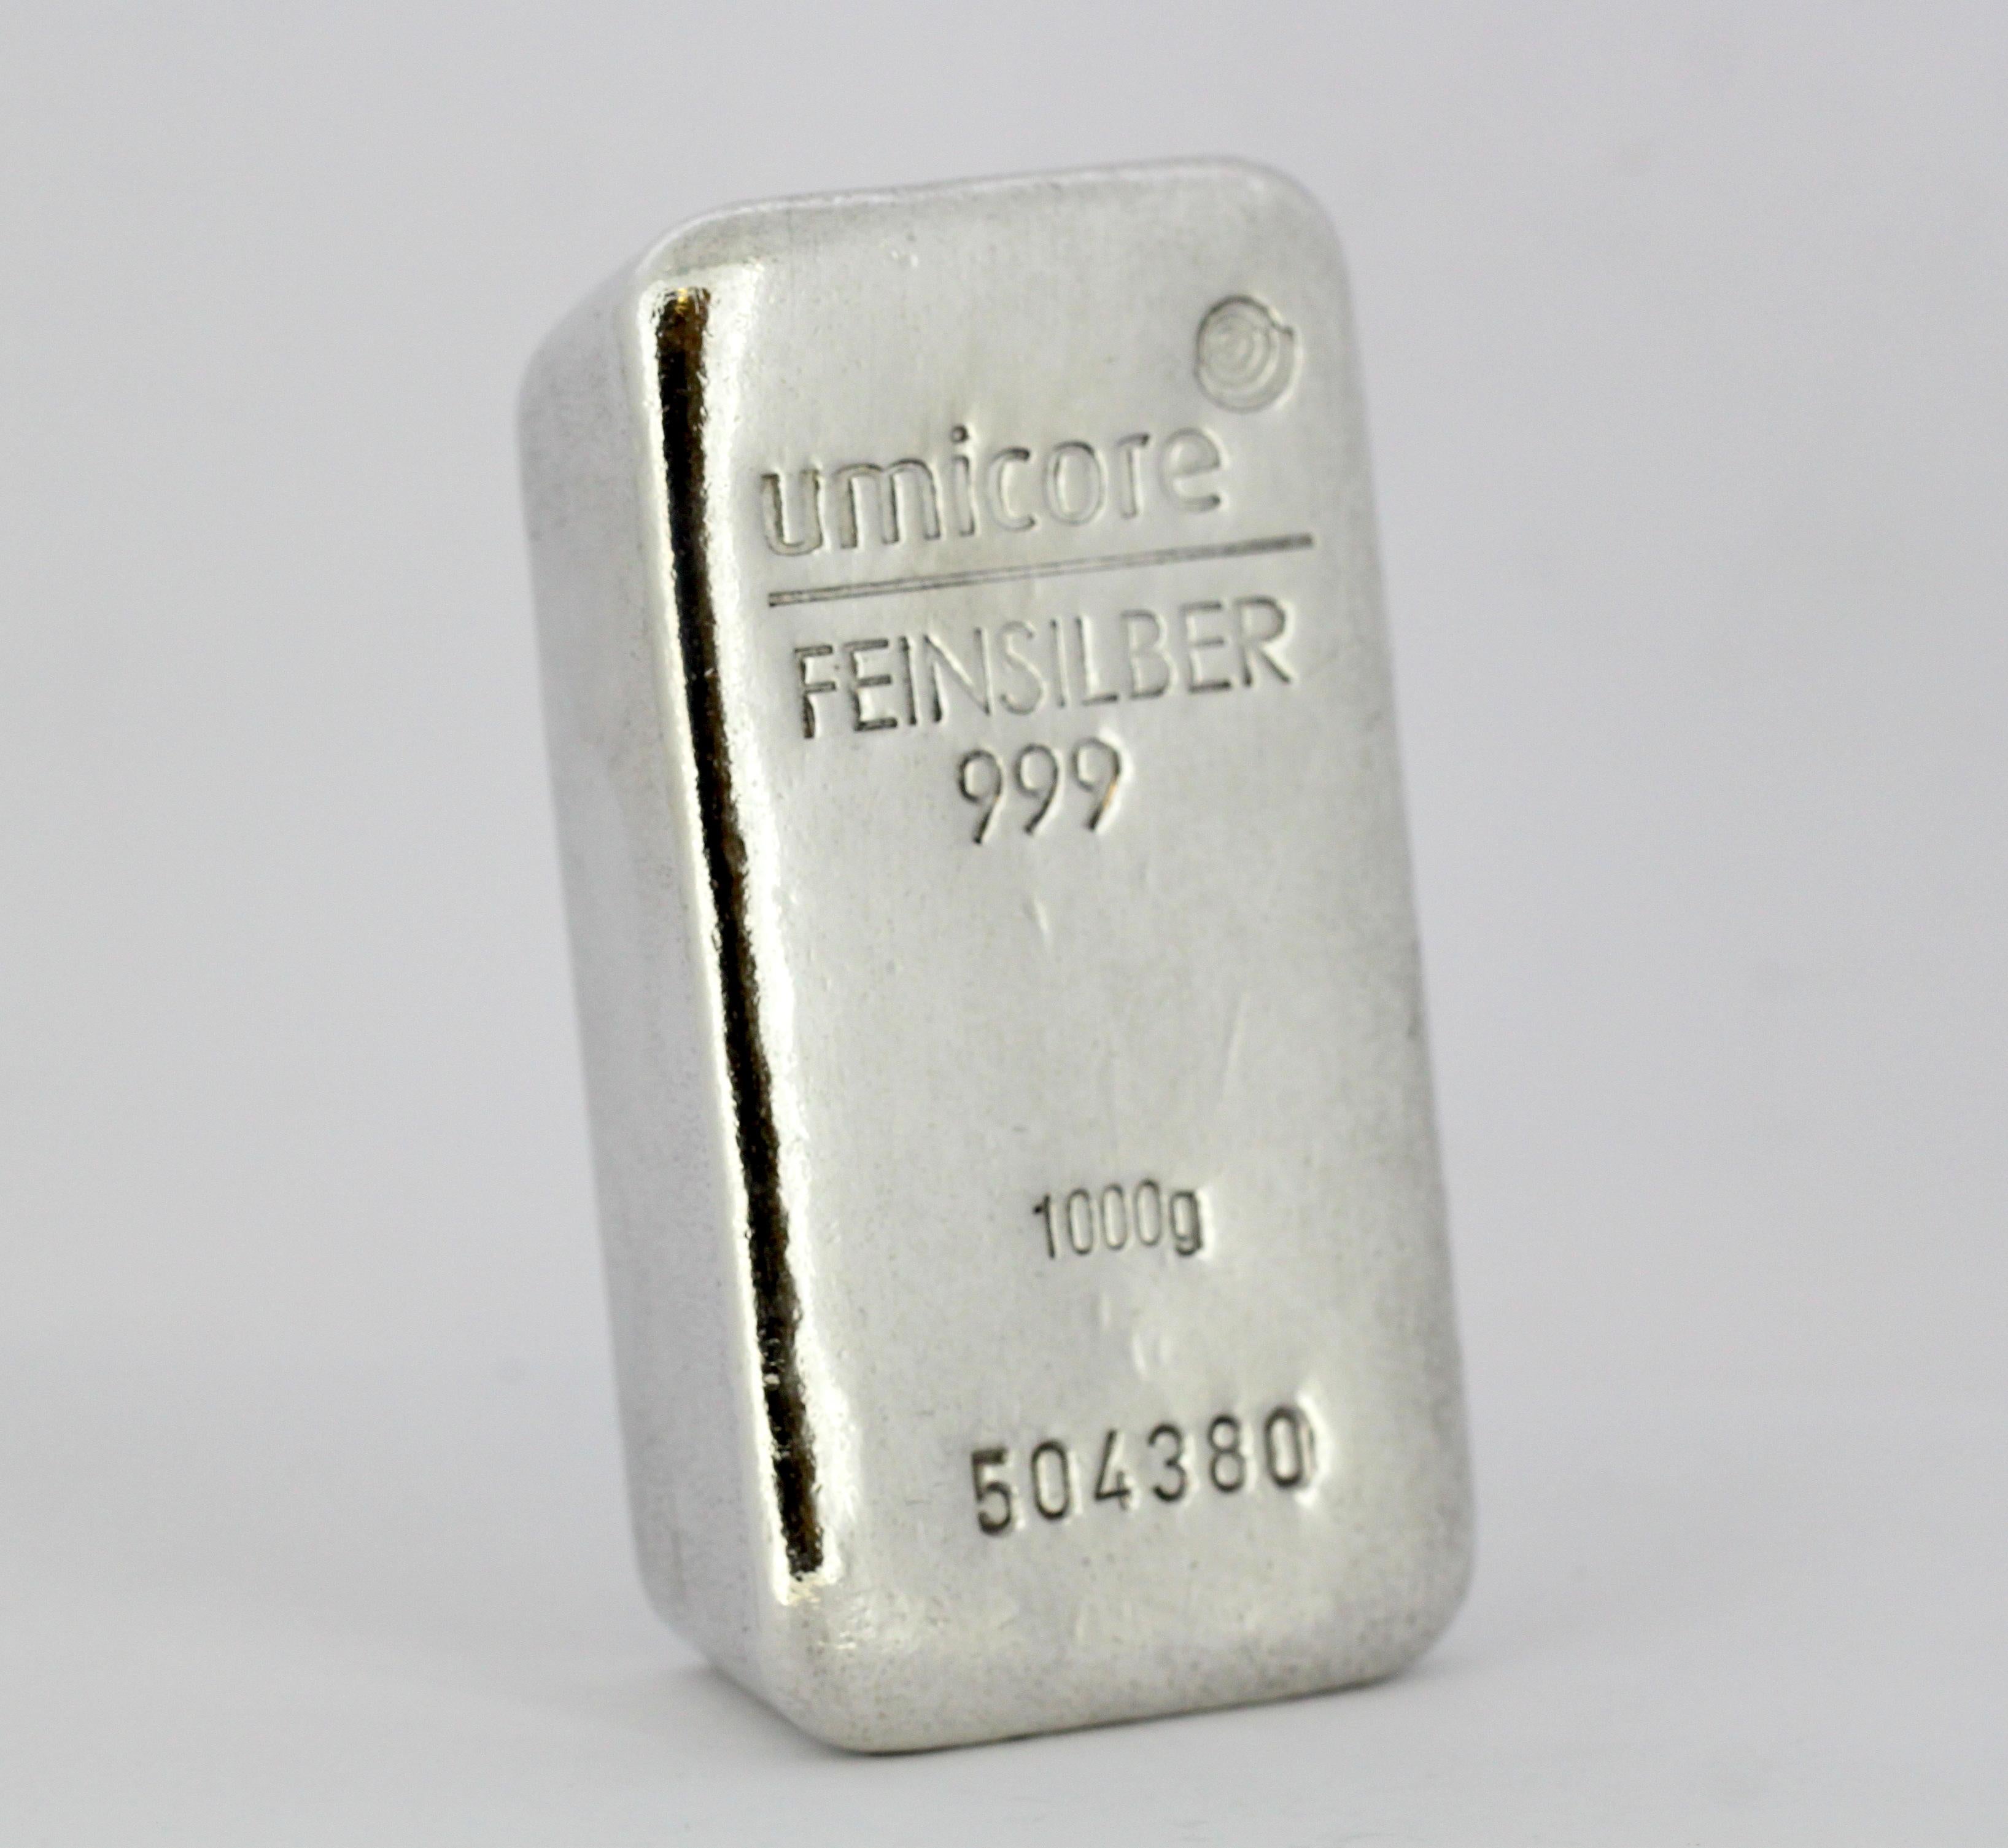 Umicore .999 silver 1kg (1000g) poured bar.

Dimensions:
Size: 8.9 x 4.8 x 2.6 cm
Weight: 1000 grams

Condition: Pre-owned, great condition.